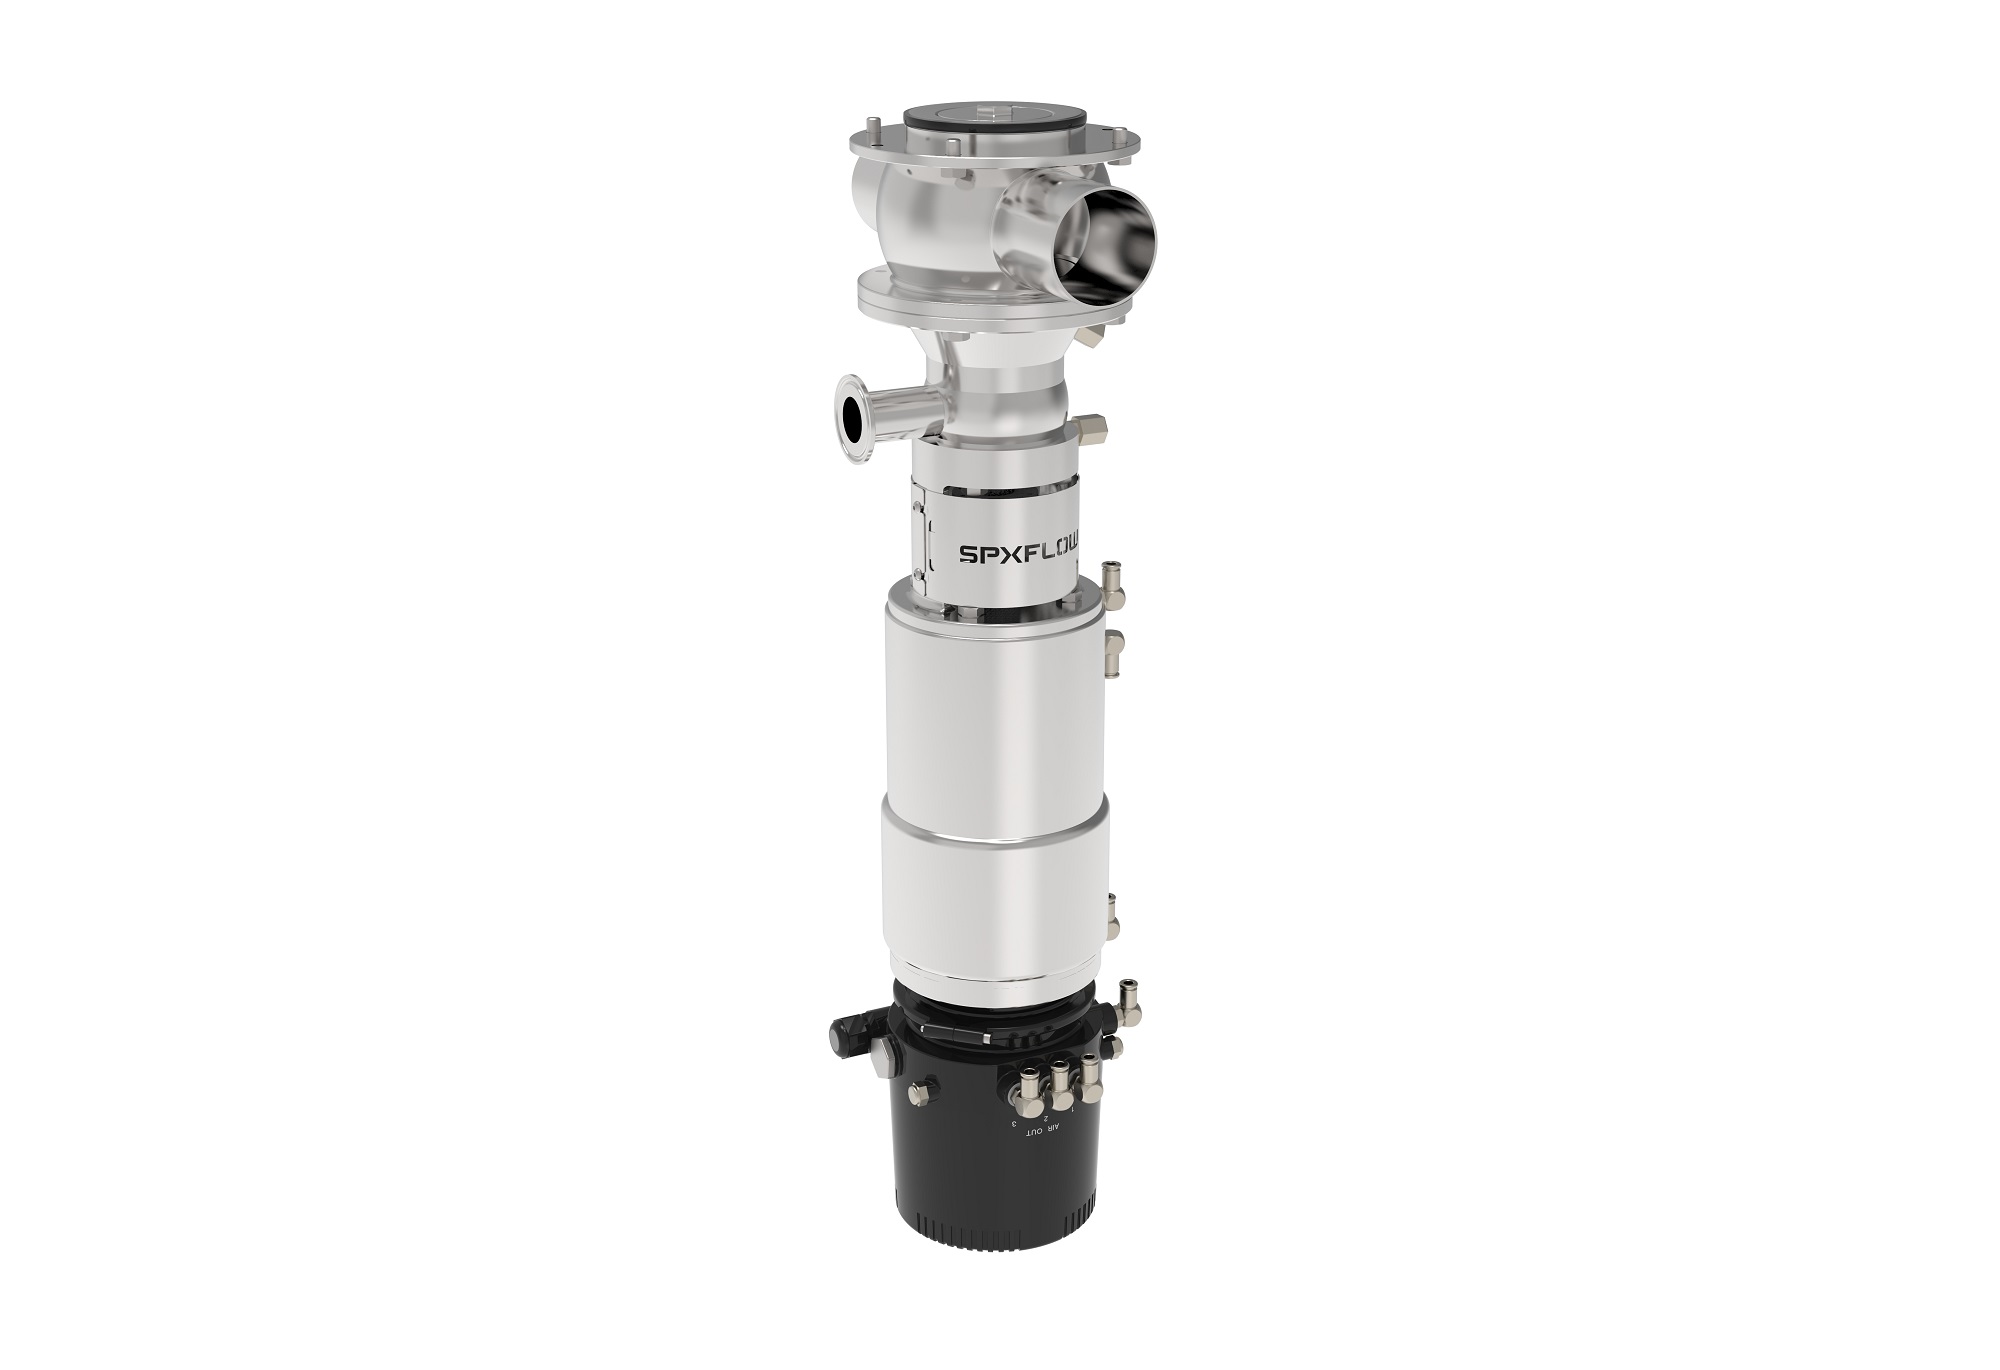 Designed and manufactured by SPX Flow, the APV D4 valves enable reliable separation between the tank and servicing pipeline in sanitary applications.